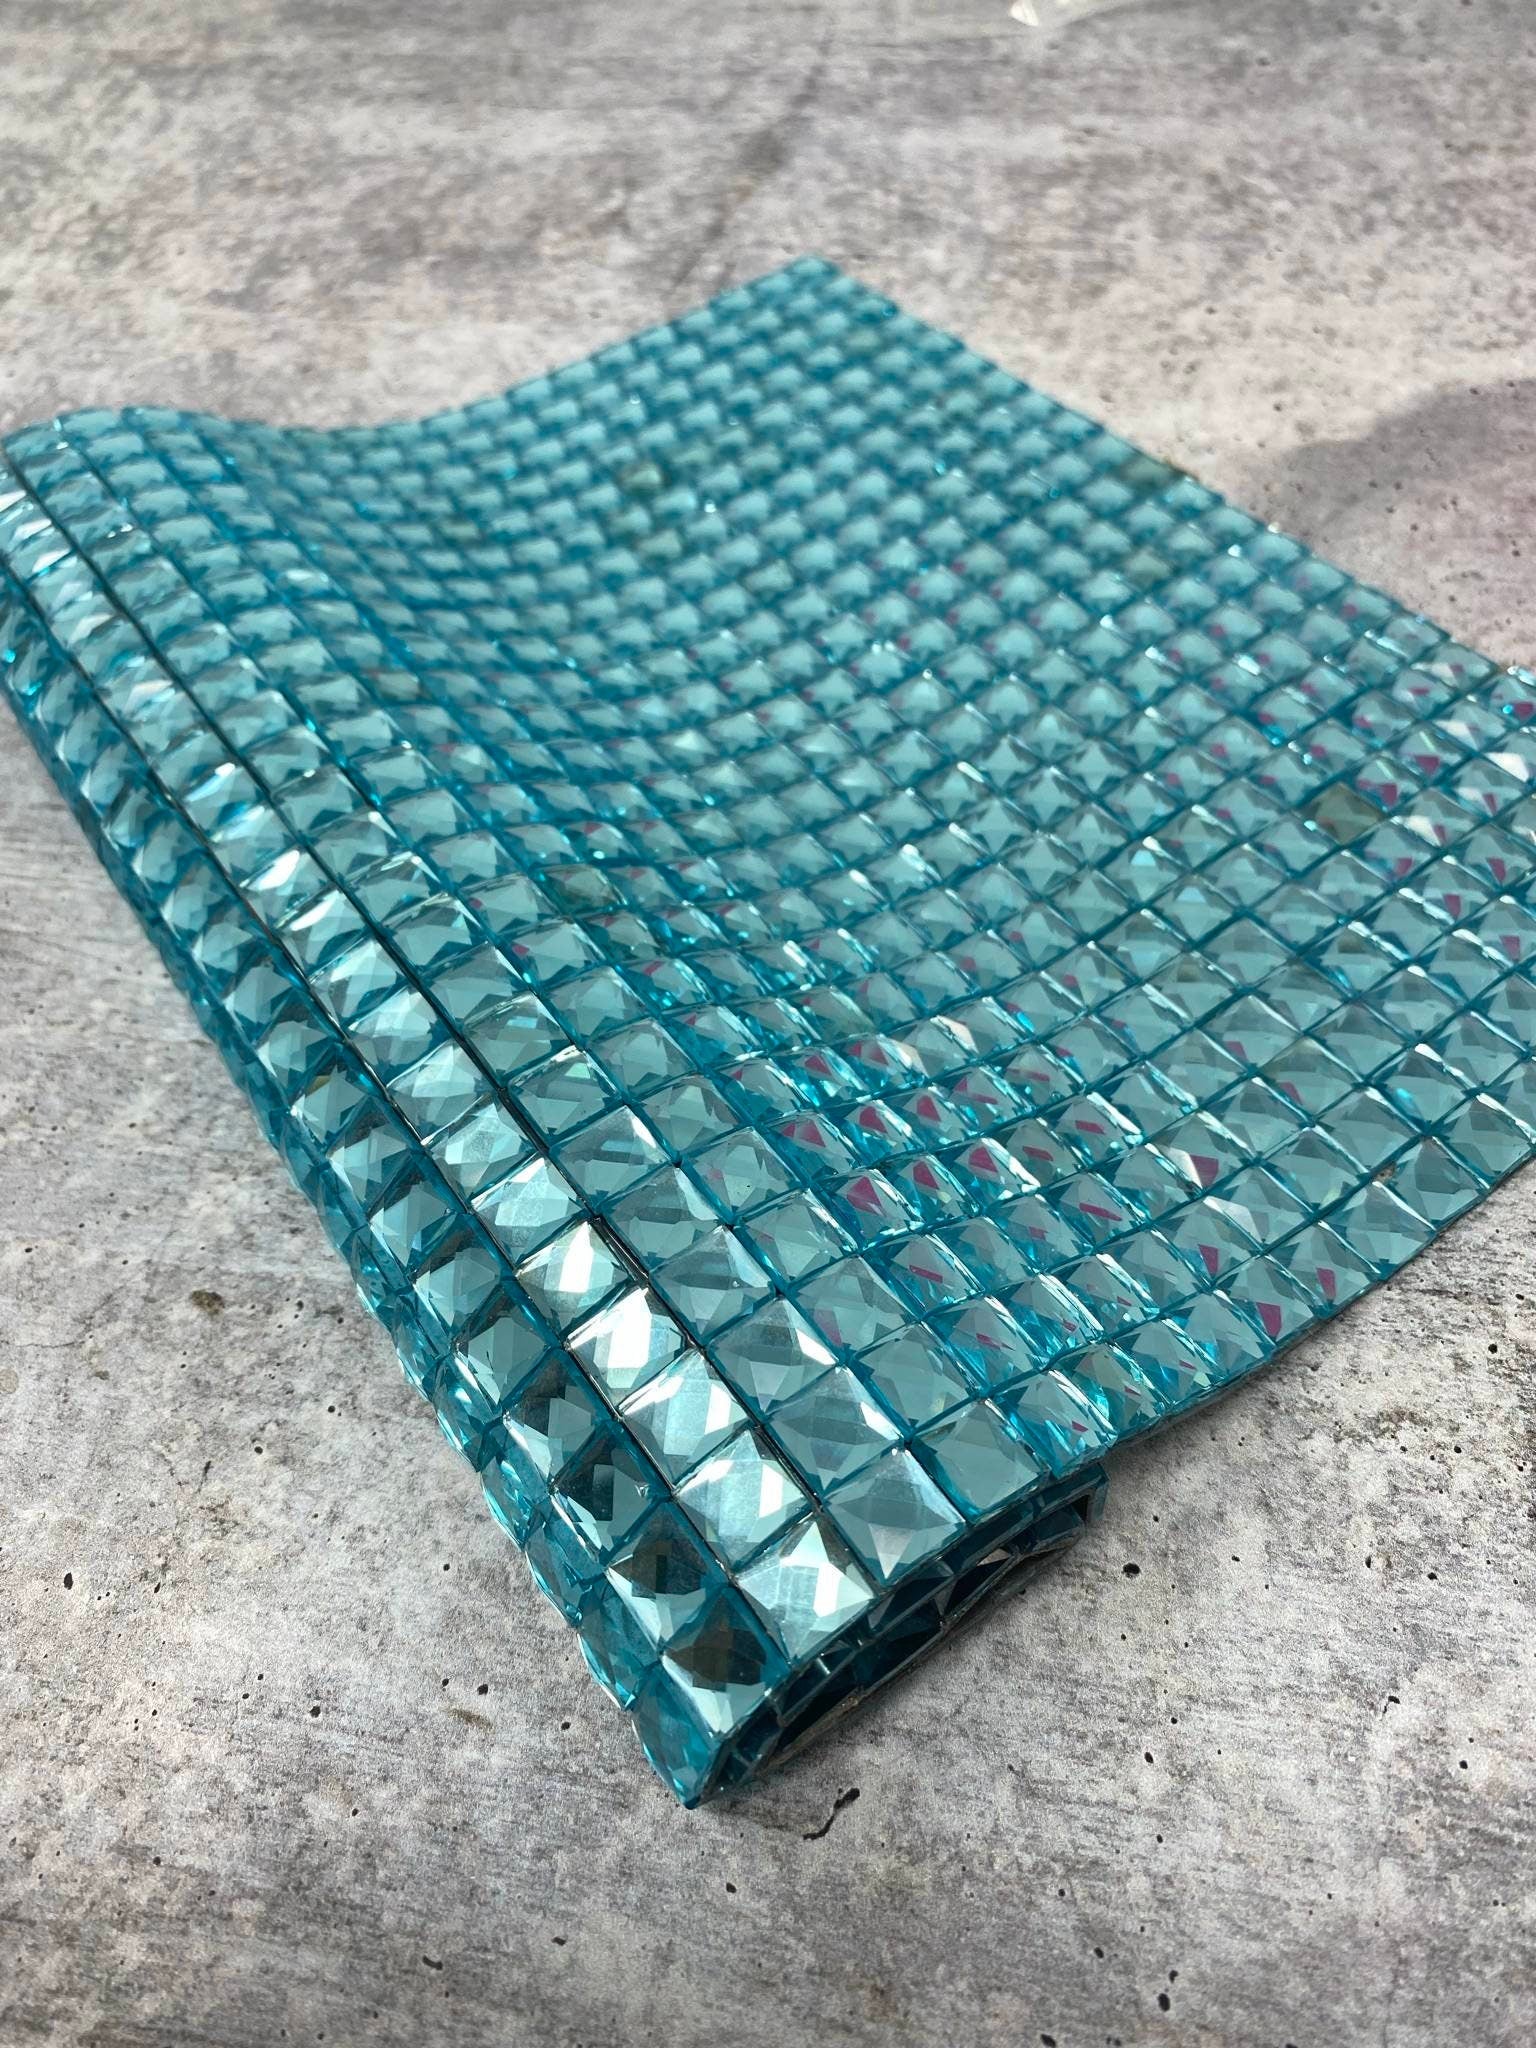 Glass "TURQUOISE" Squares,Hot-fix Rhinestone Sheet for Blinging Clothes, Shoes, Handbags, Wine Glasses & More, 10" x 16.5" sz, 135 Squares